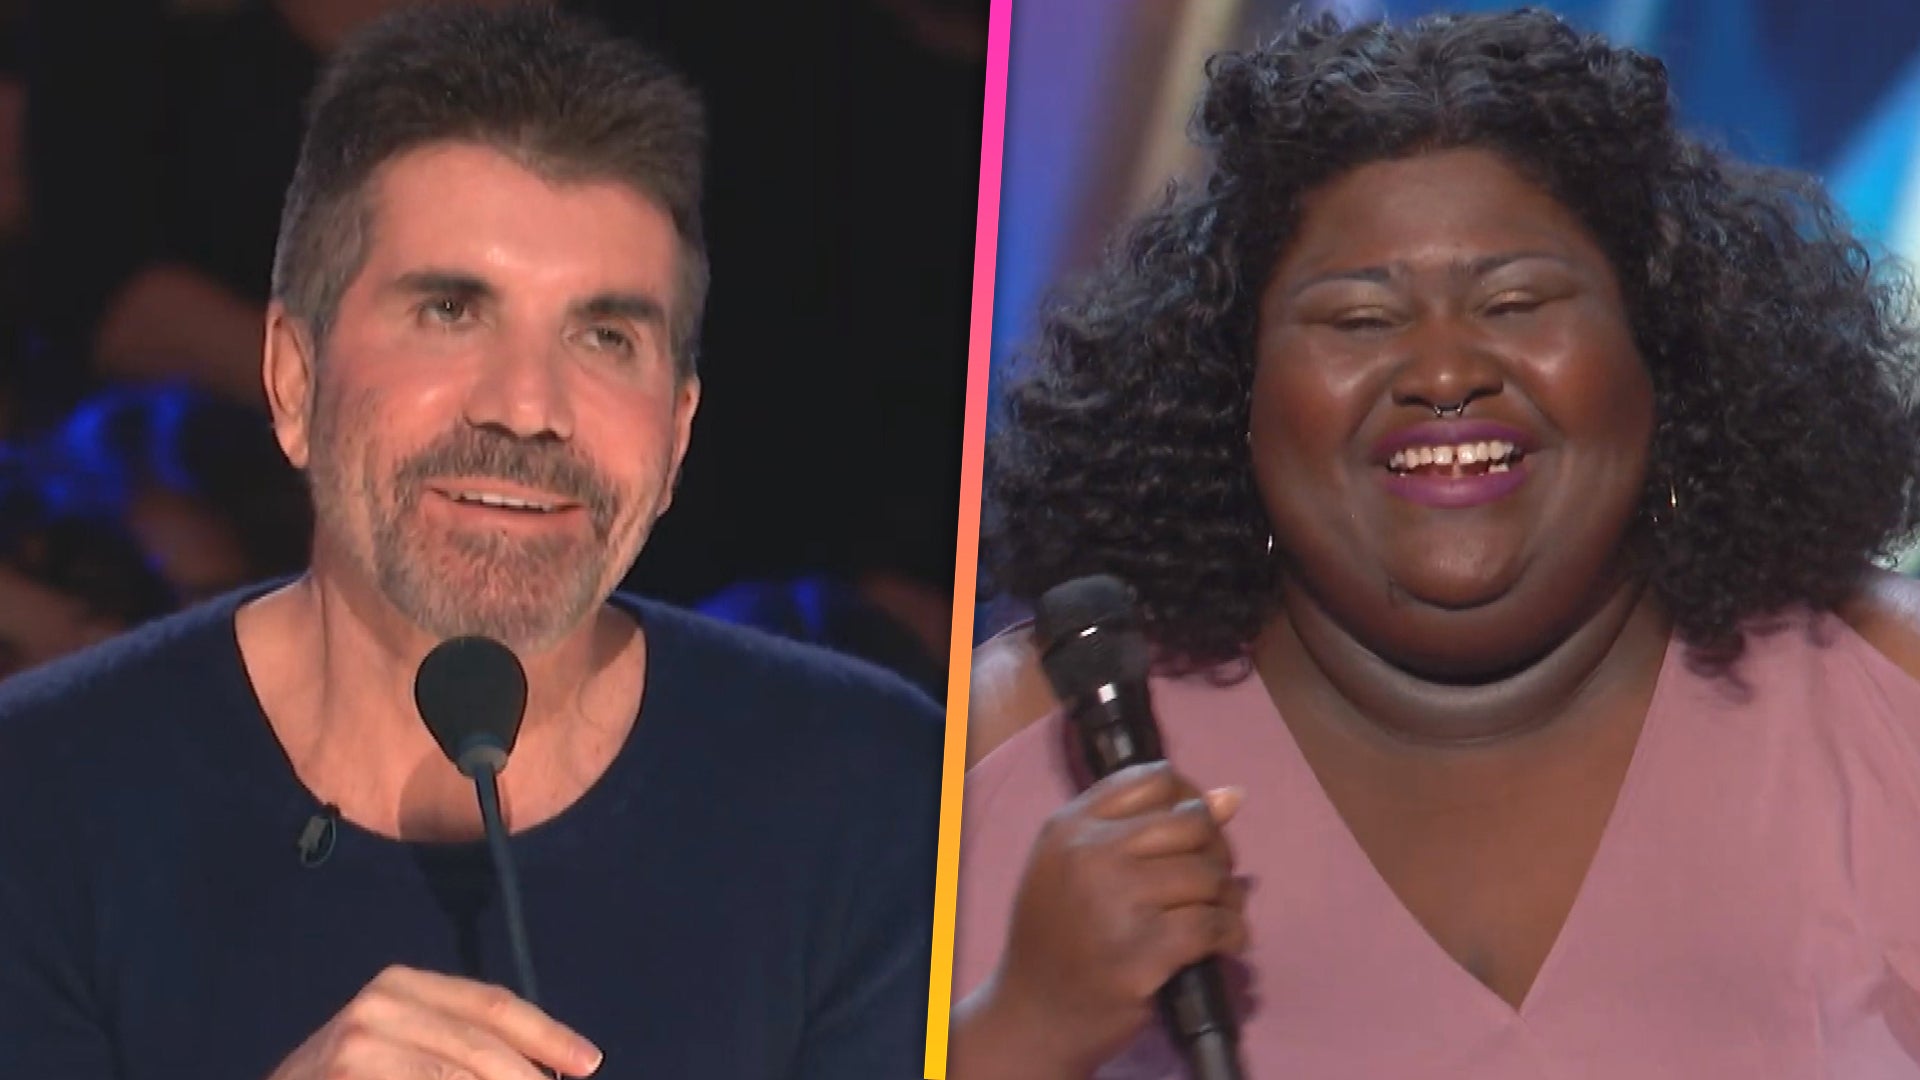 'America's Got Talent': Simon Cowell Fights Through Vocal Injury to Bring Singer to Tears of Joy 